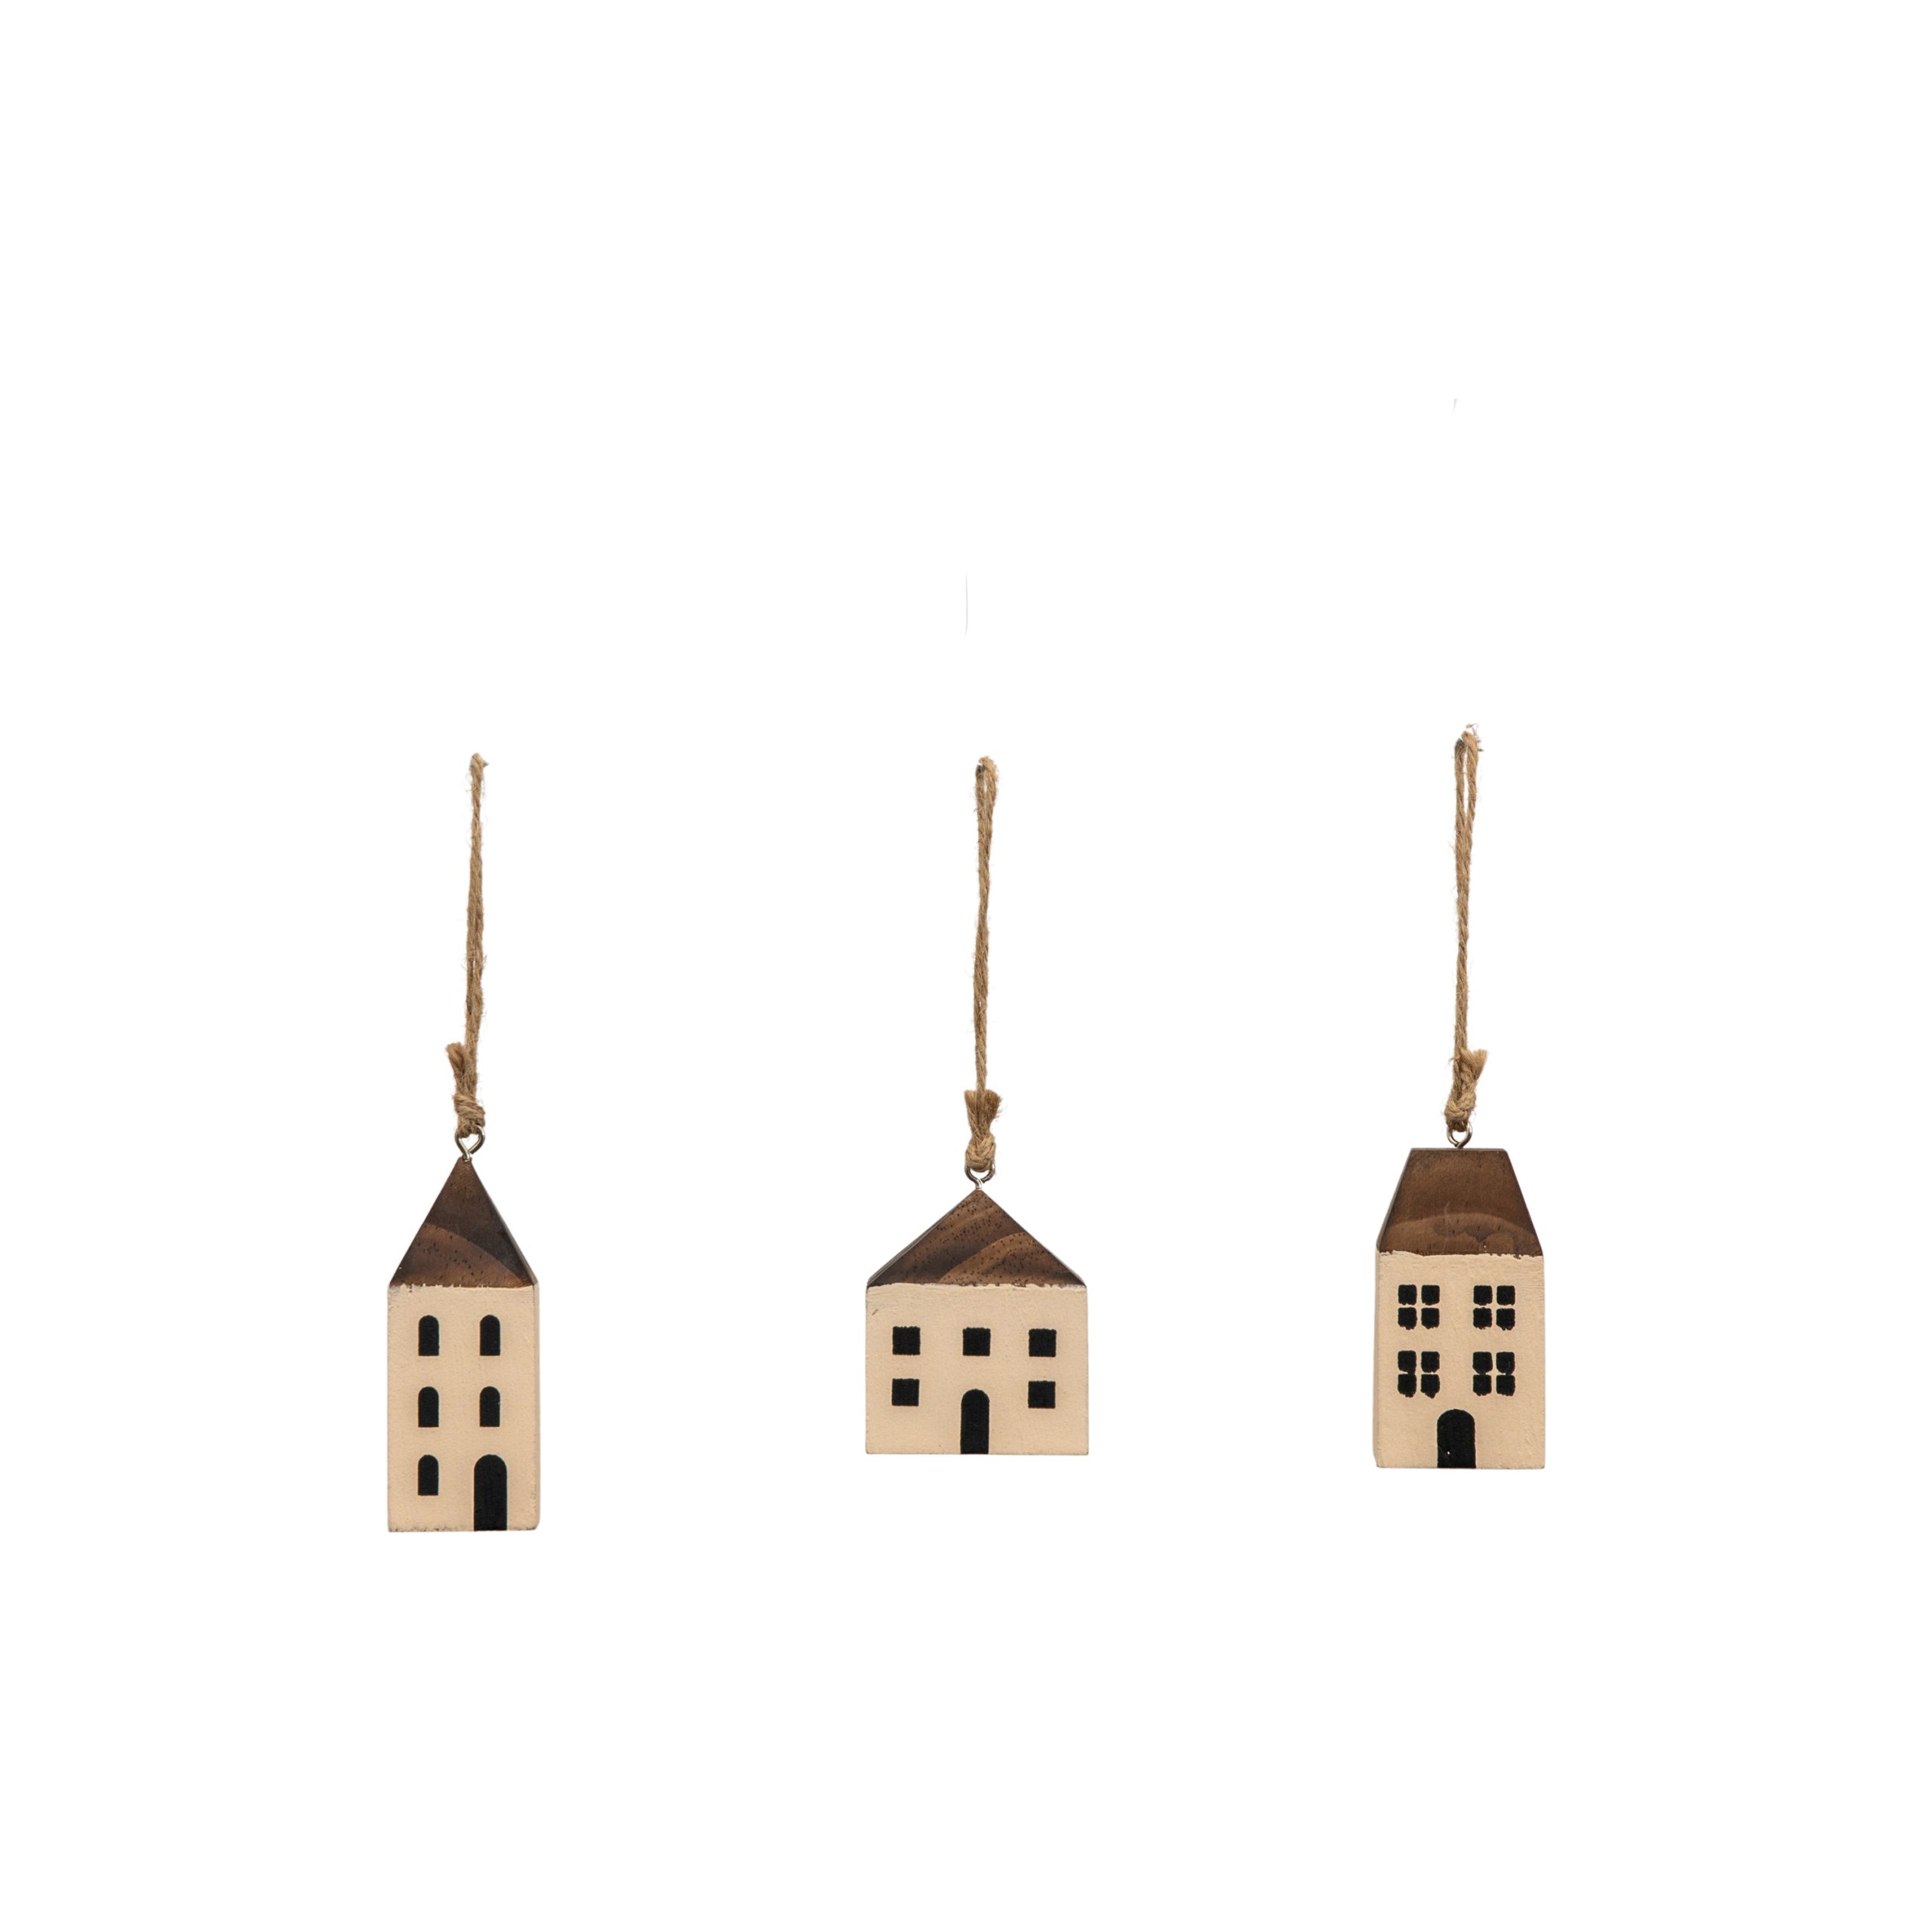 Gallery Direct Hanging Houses